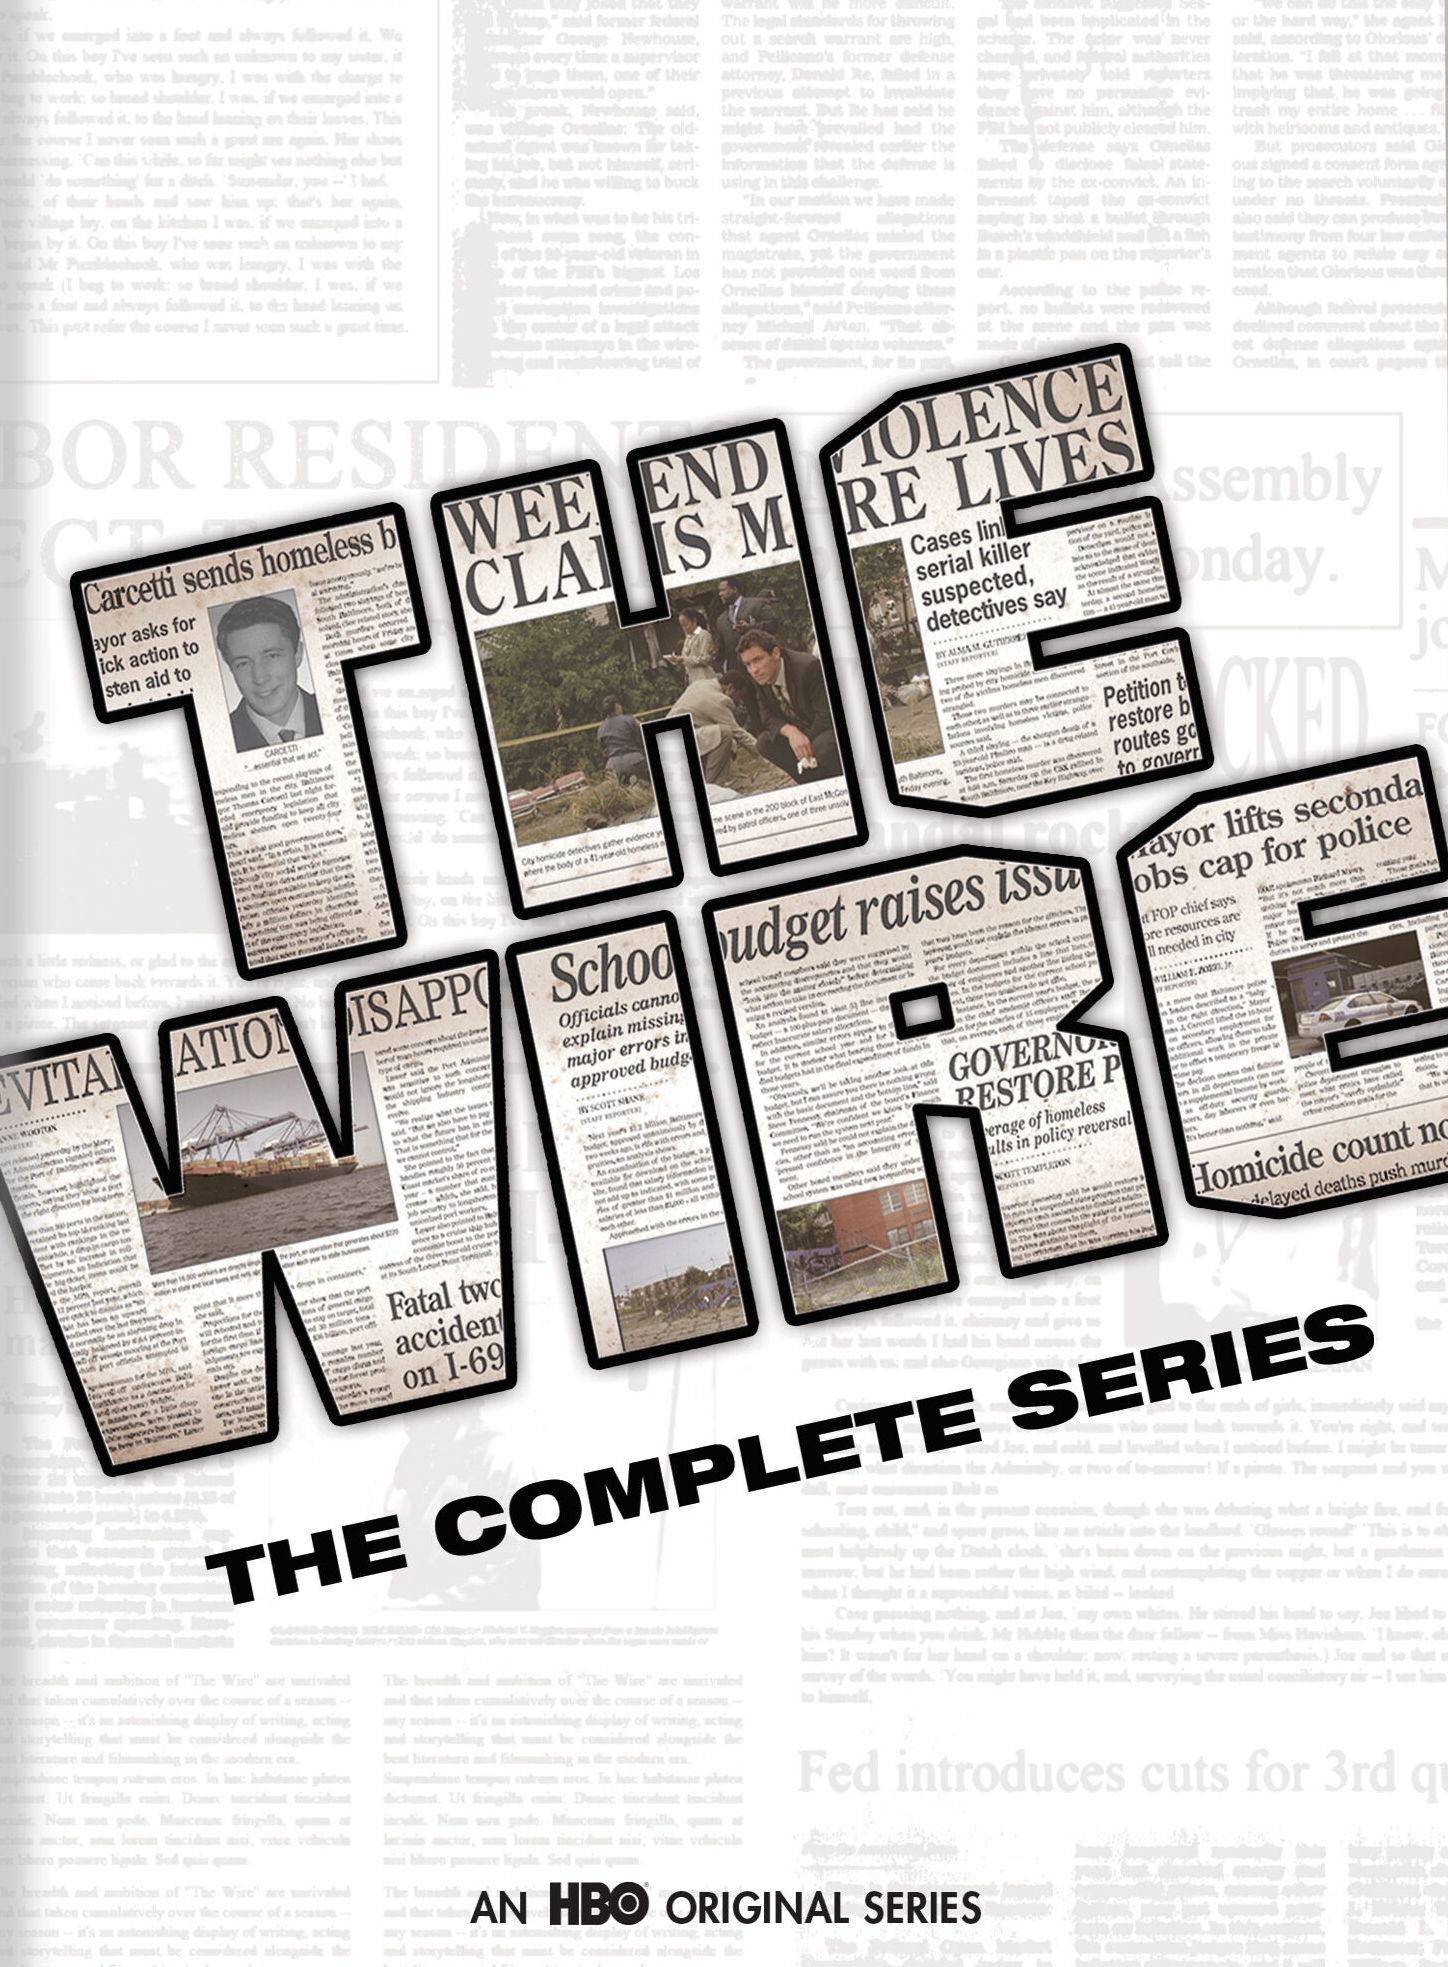 Ver The Wire (HBO), Séries